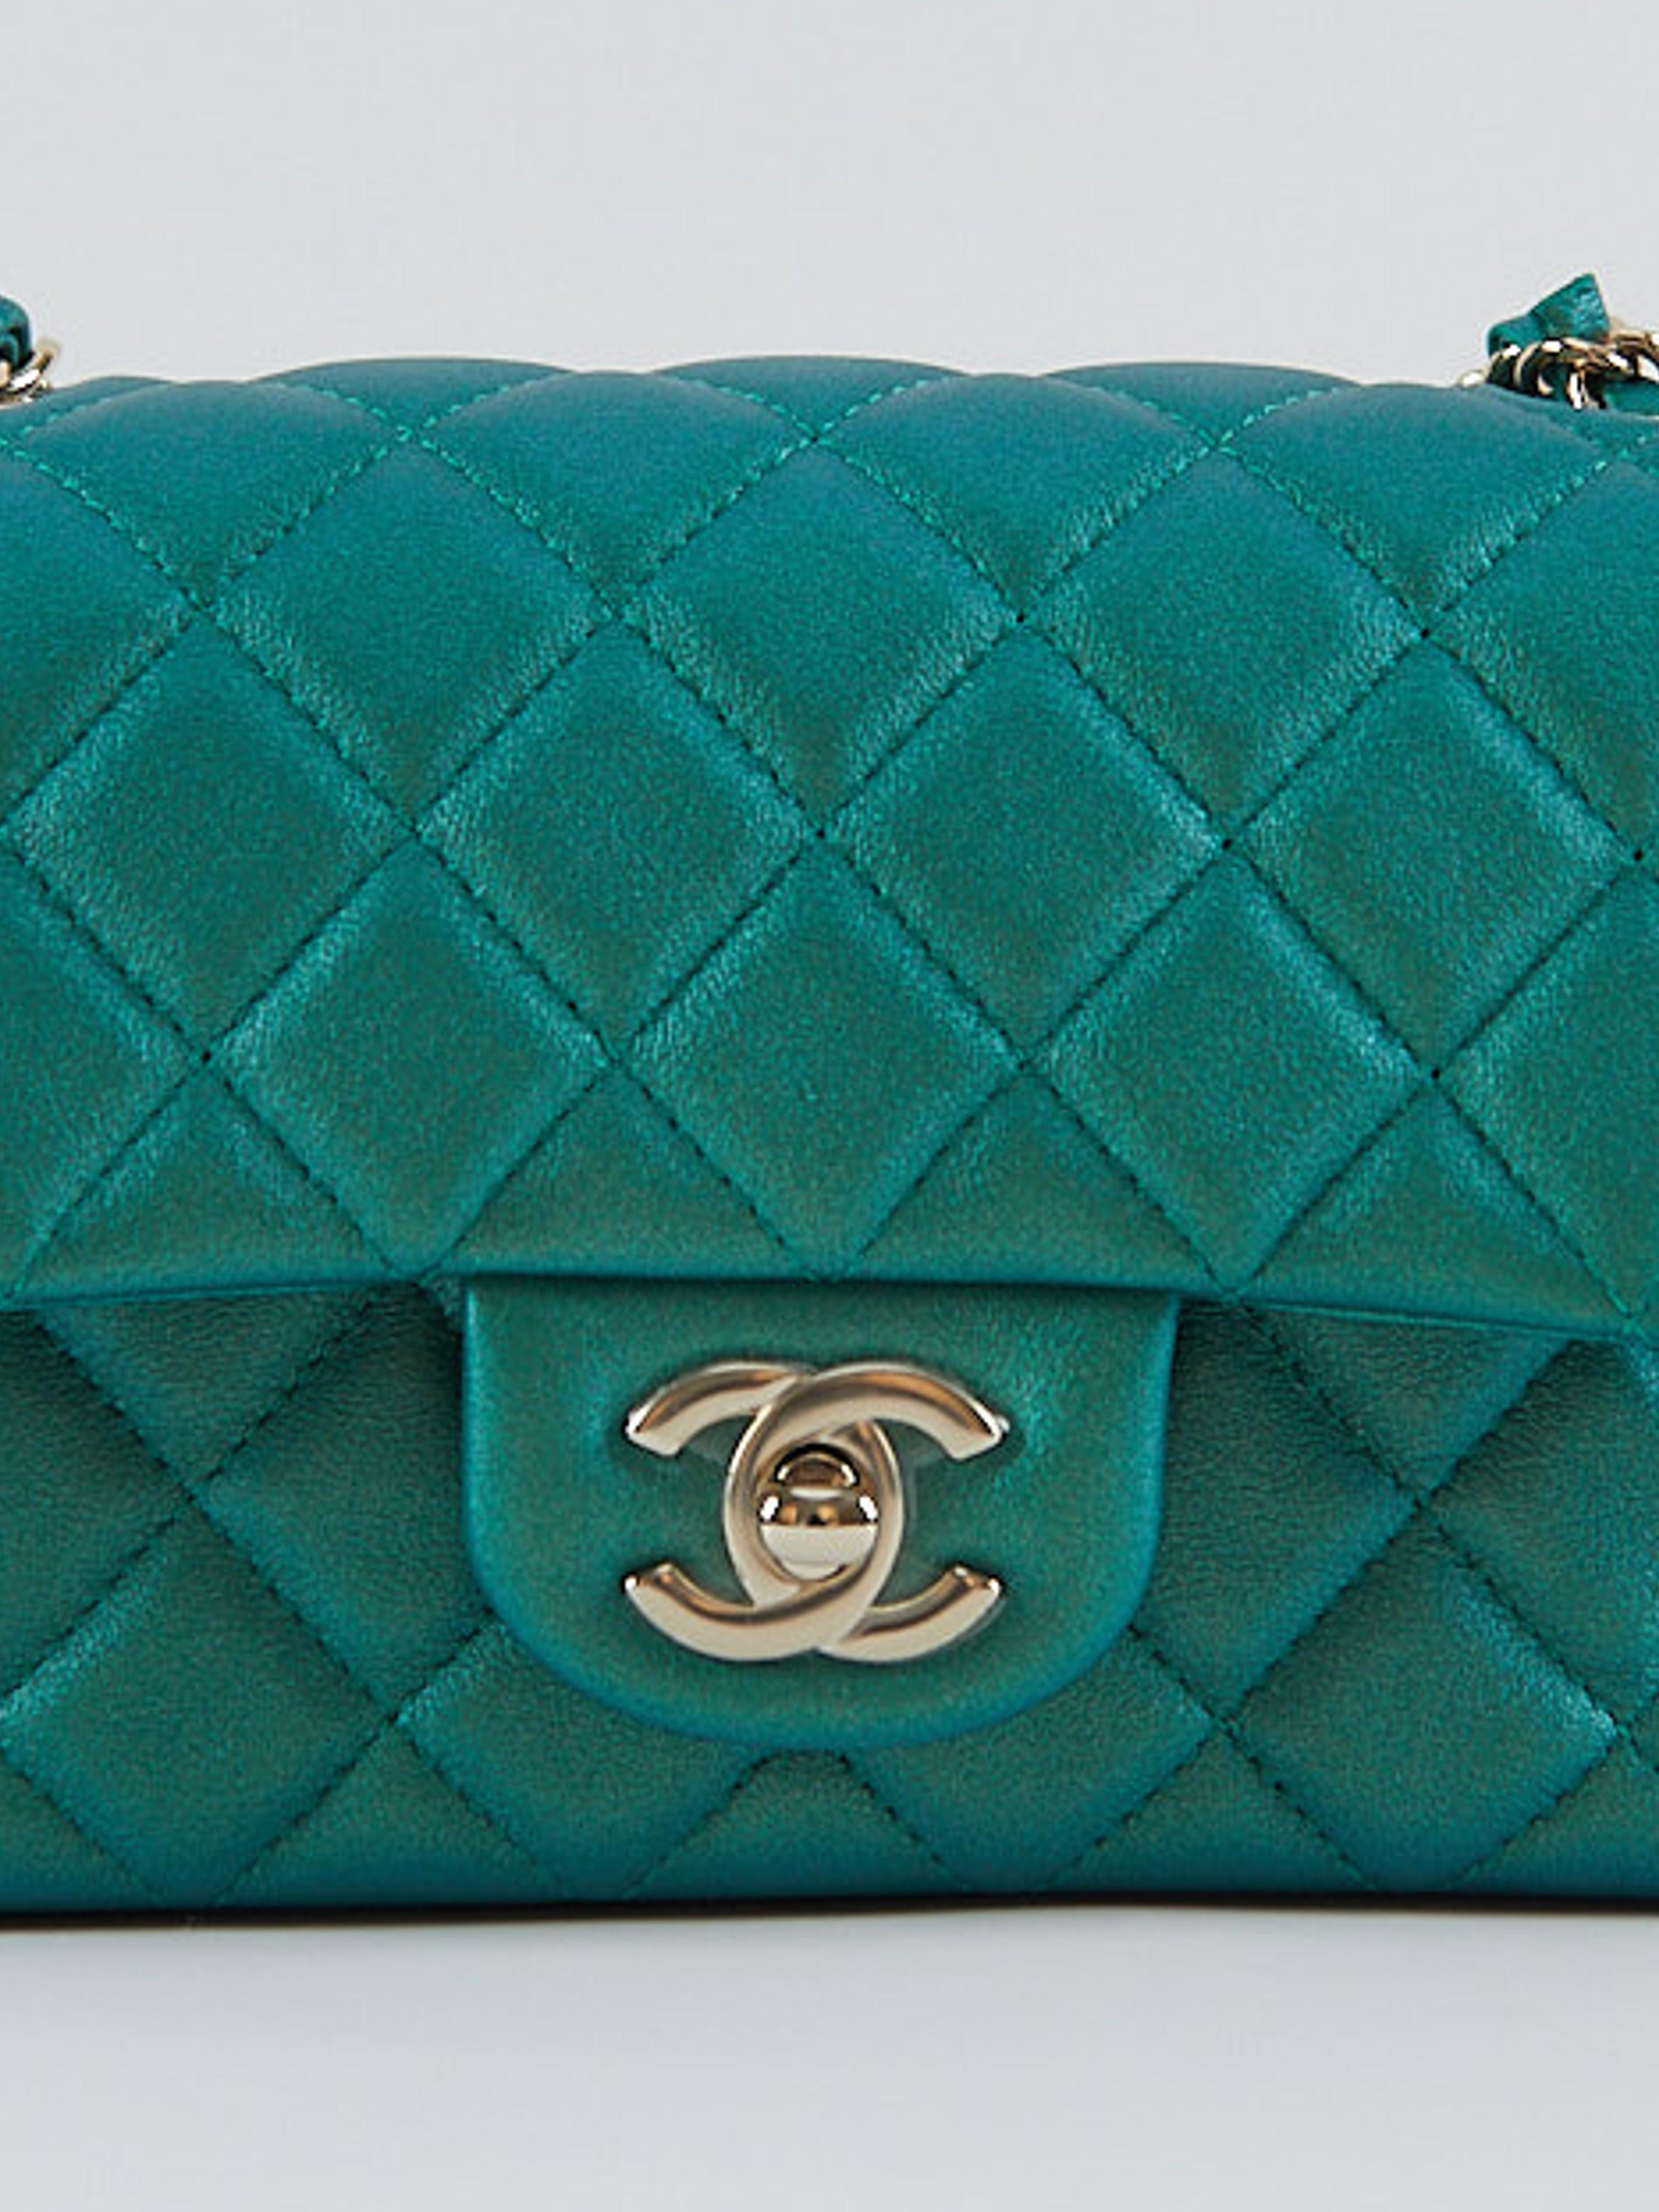 CHANEL MINI FLAP BAG PEARLESCENT GREEN Lambskin Leather with Champagne Hardware 1